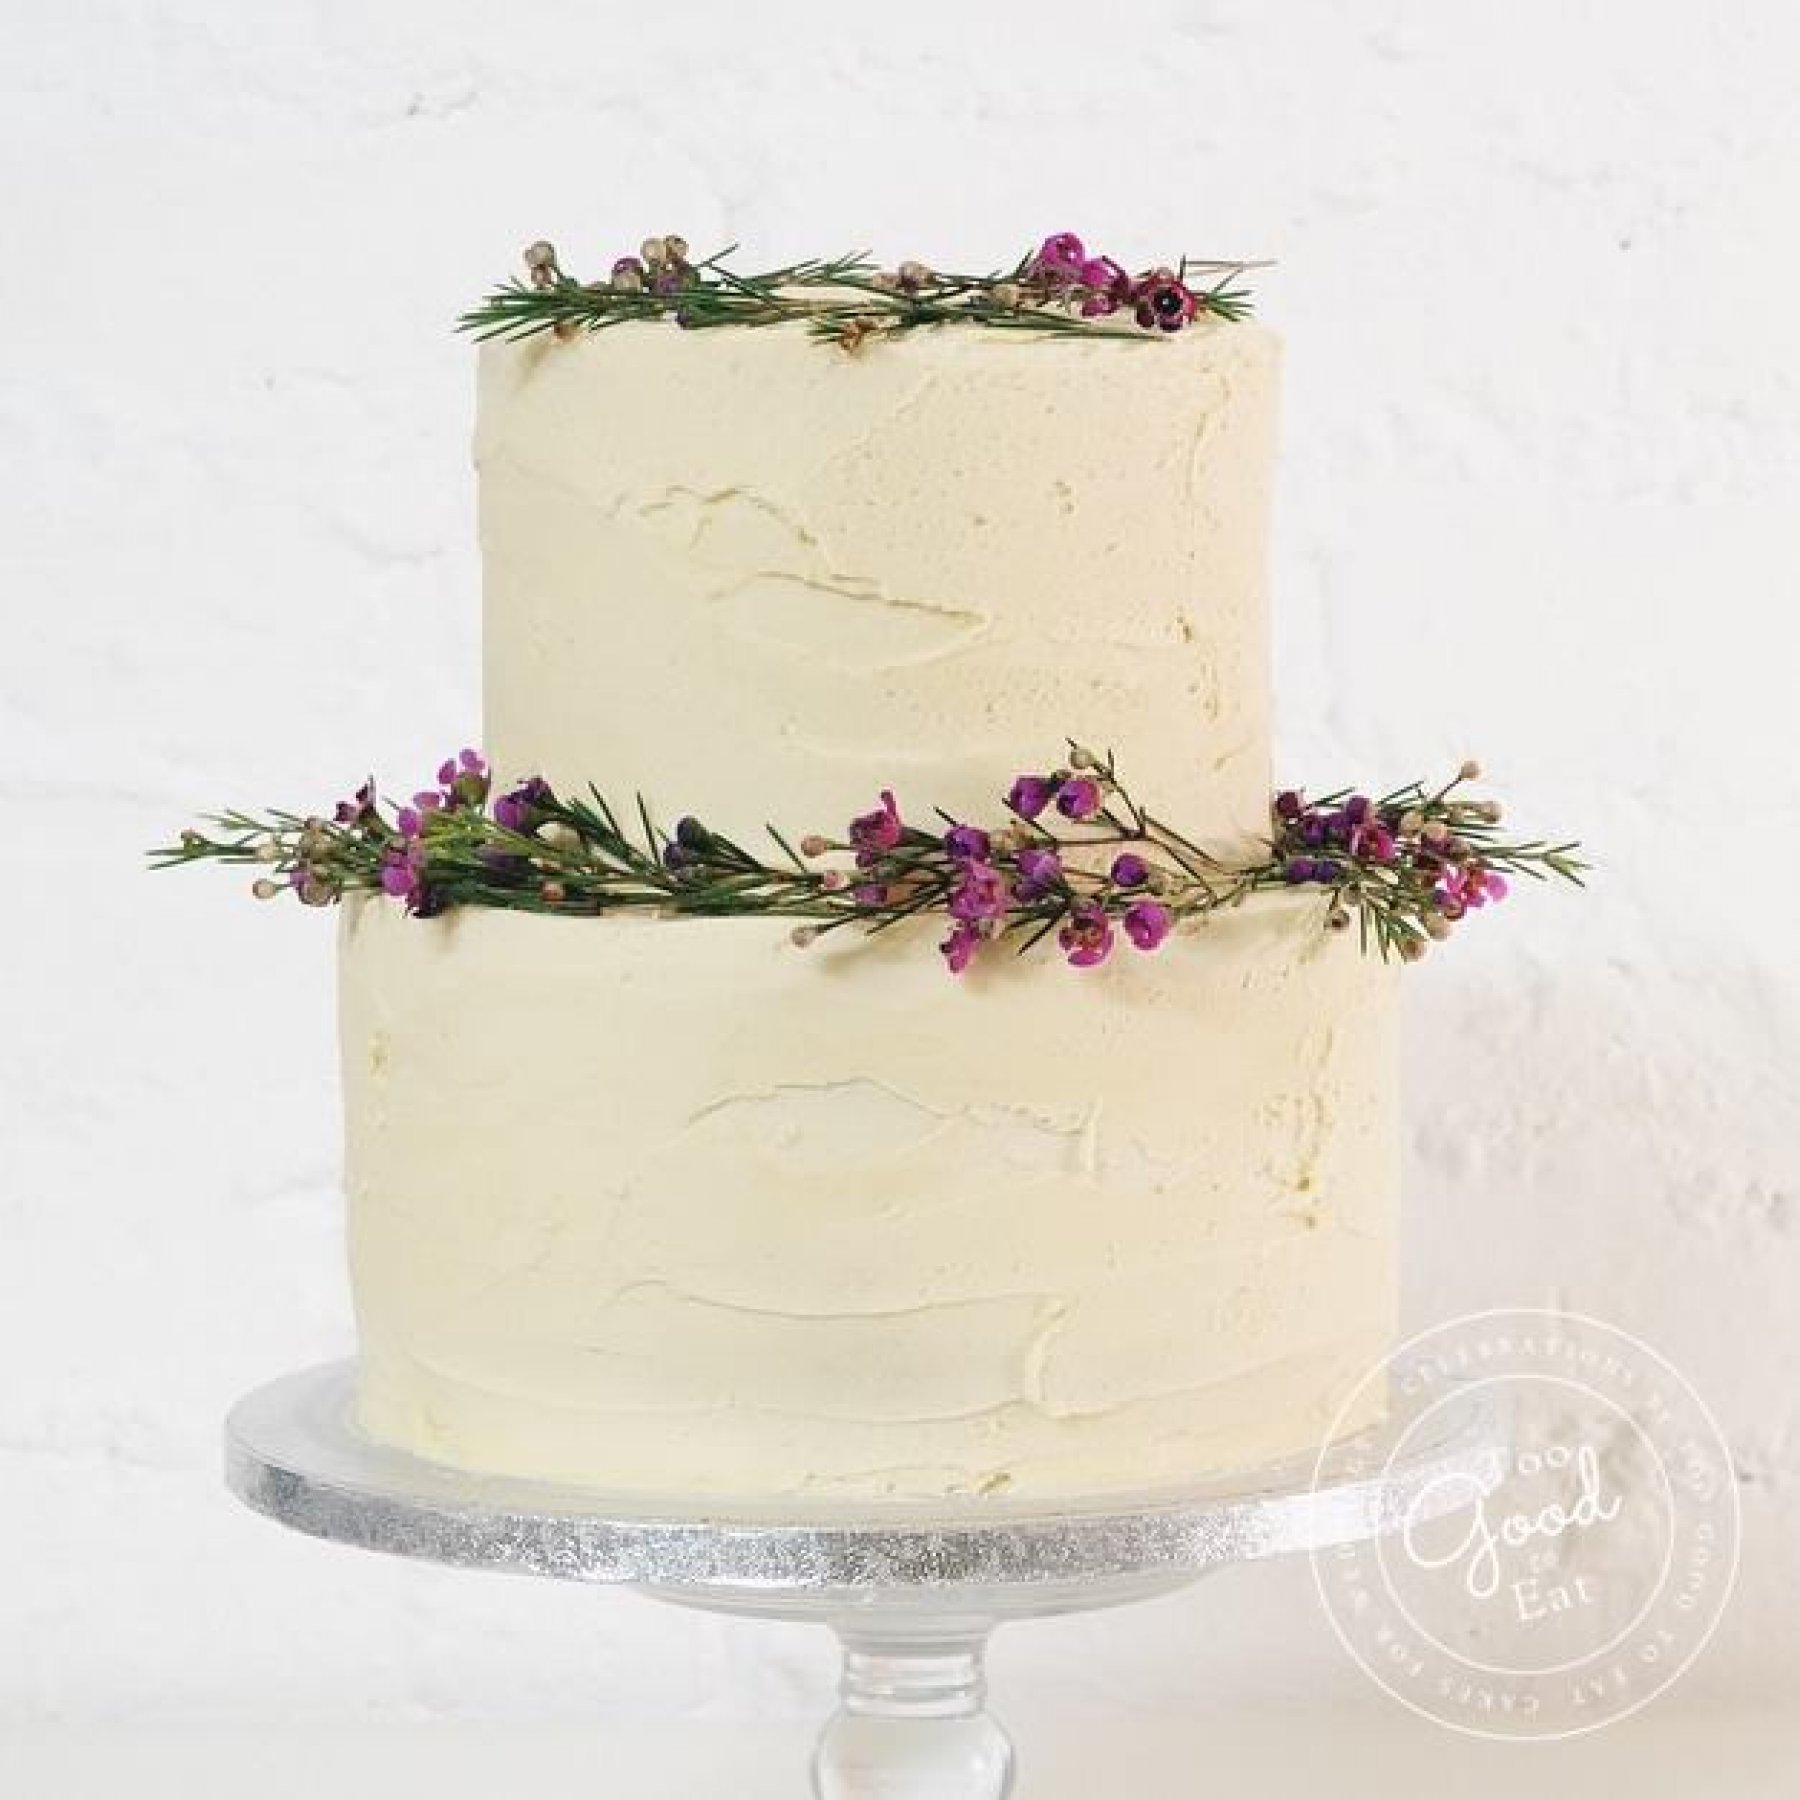 Pam Rennie Cake Design in Aberdeen & Deeside - Wedding Cakes | hitched.co.uk